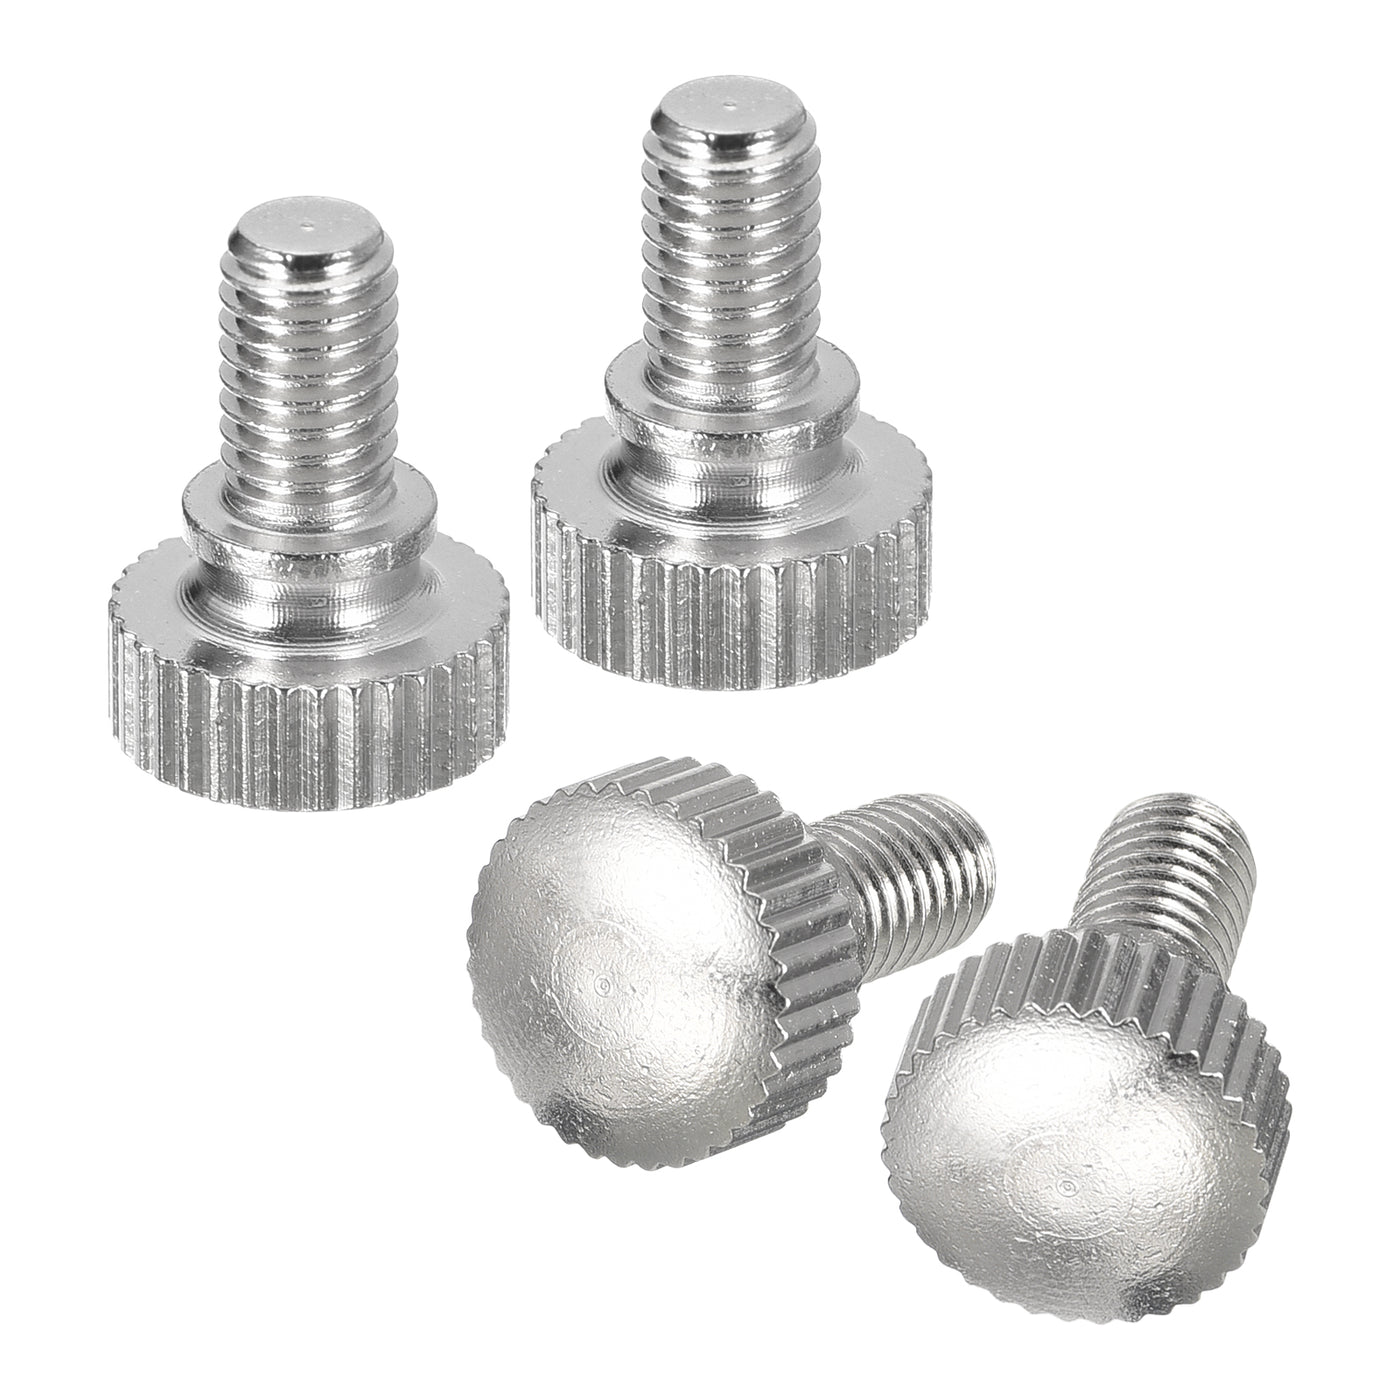 uxcell Uxcell M5x8mm Knurled Thumb Screws, 4pcs Brass Thumb Screws with Shoulder, Silver Tone